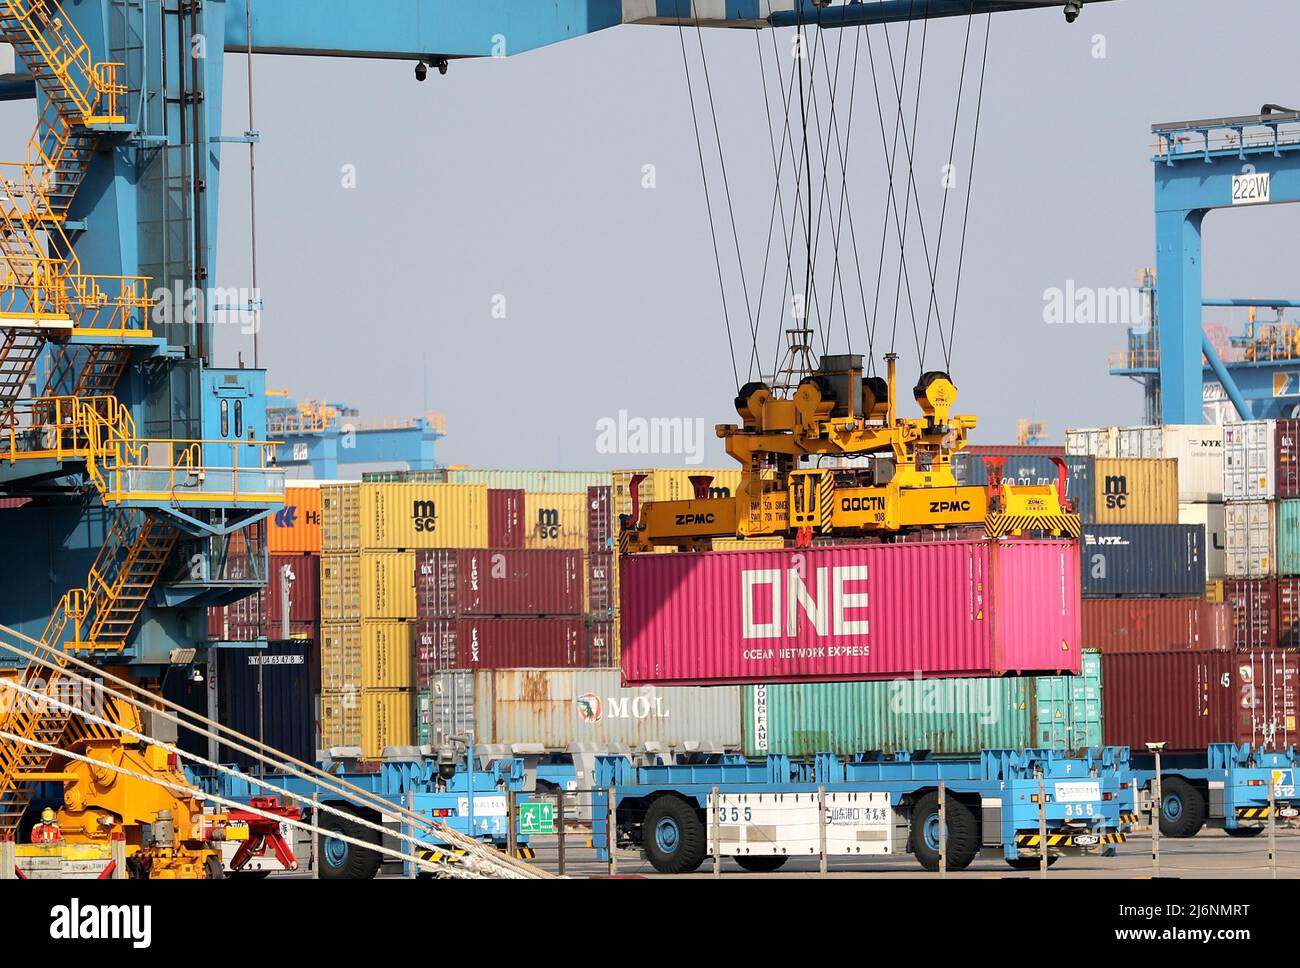 QINGDAO, CHINA - MAY 3, 2022 - An automatic guided vehicle delivers goods at a fully automated terminal in Qingdao, East China's Shandong Province, Ma Stock Photo